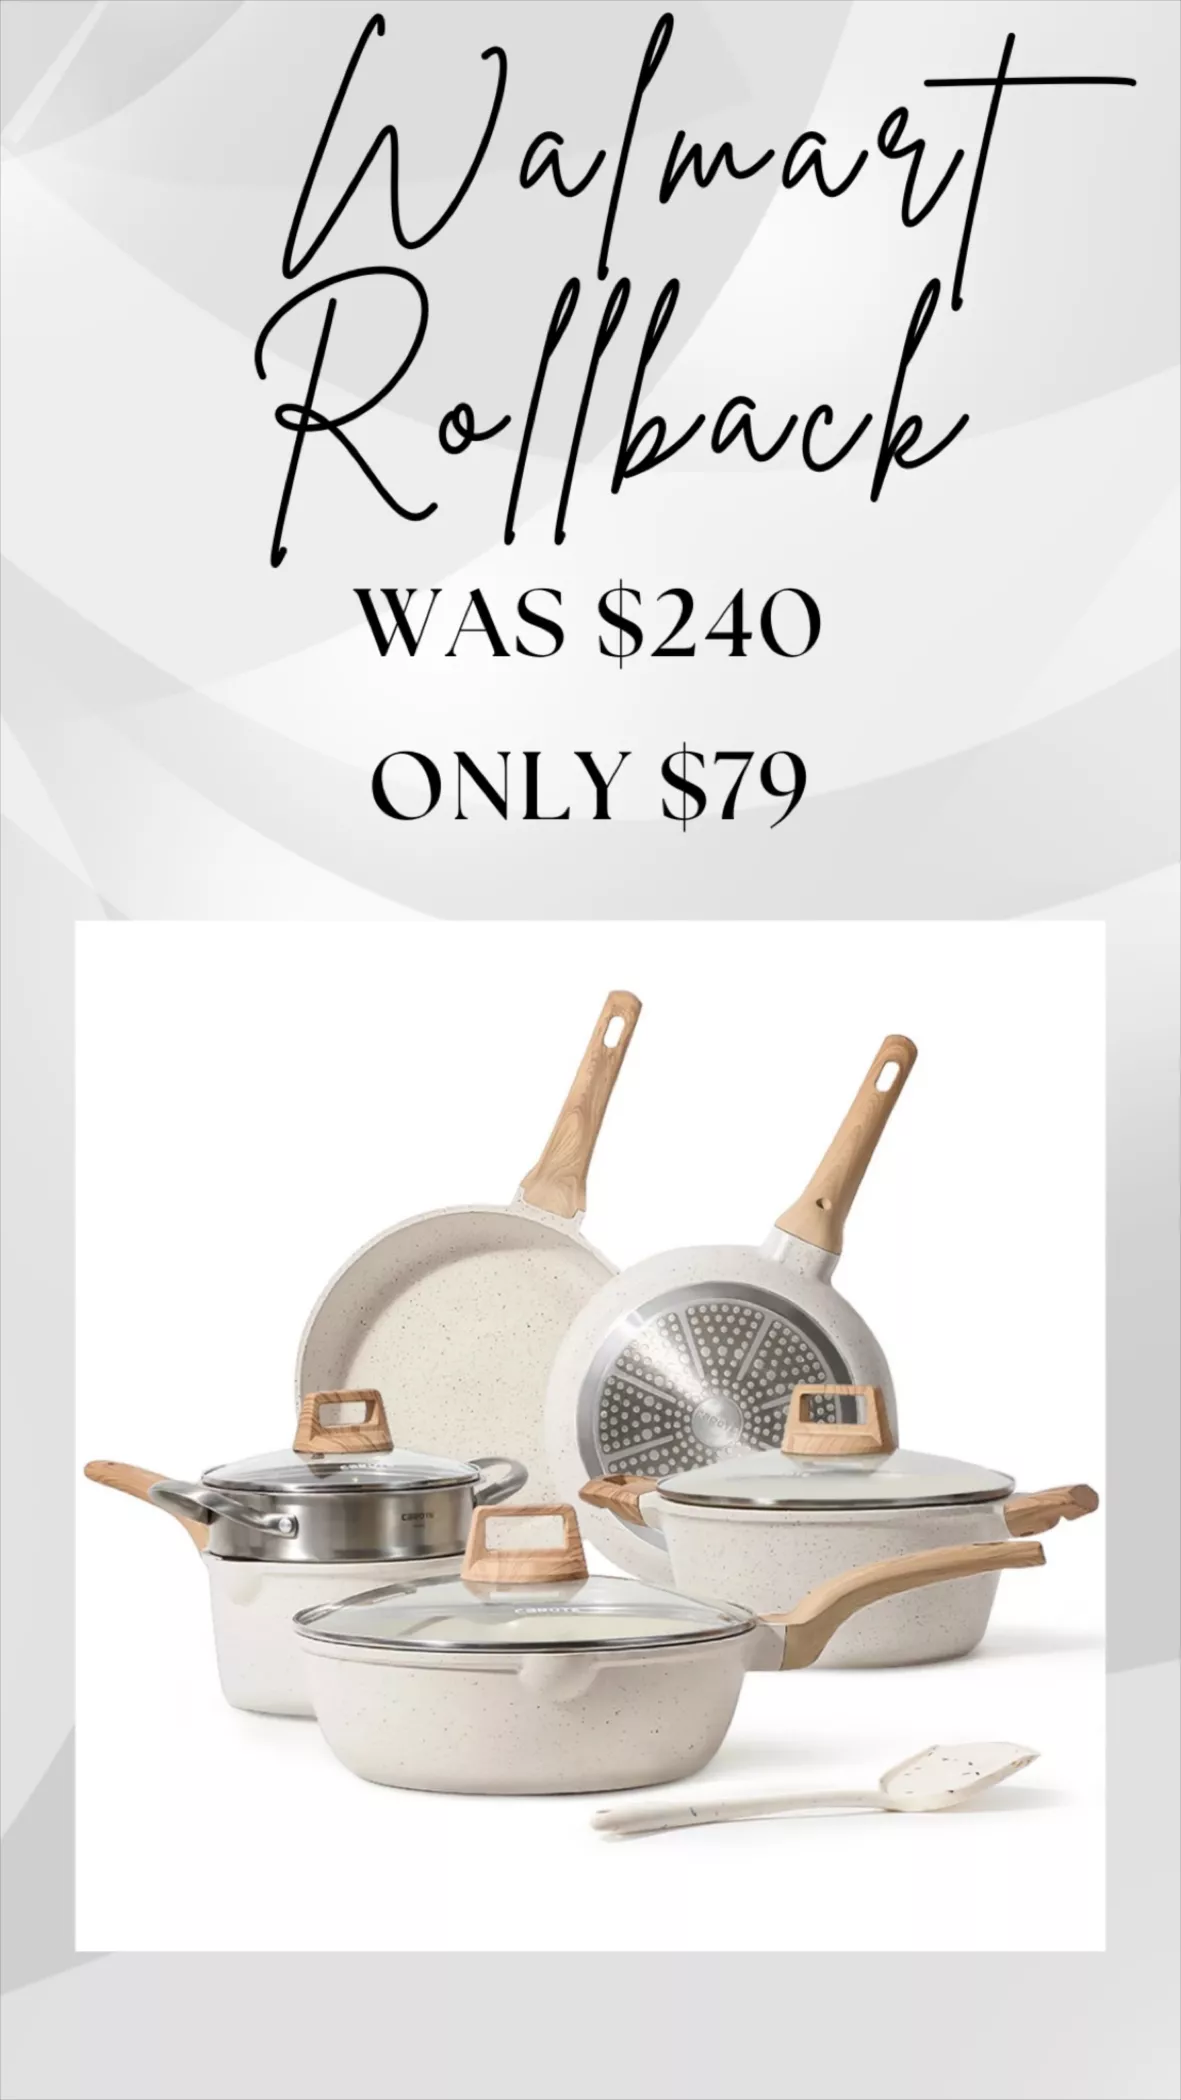 Cooking Utensils Clearance, Discounts & Rollbacks 